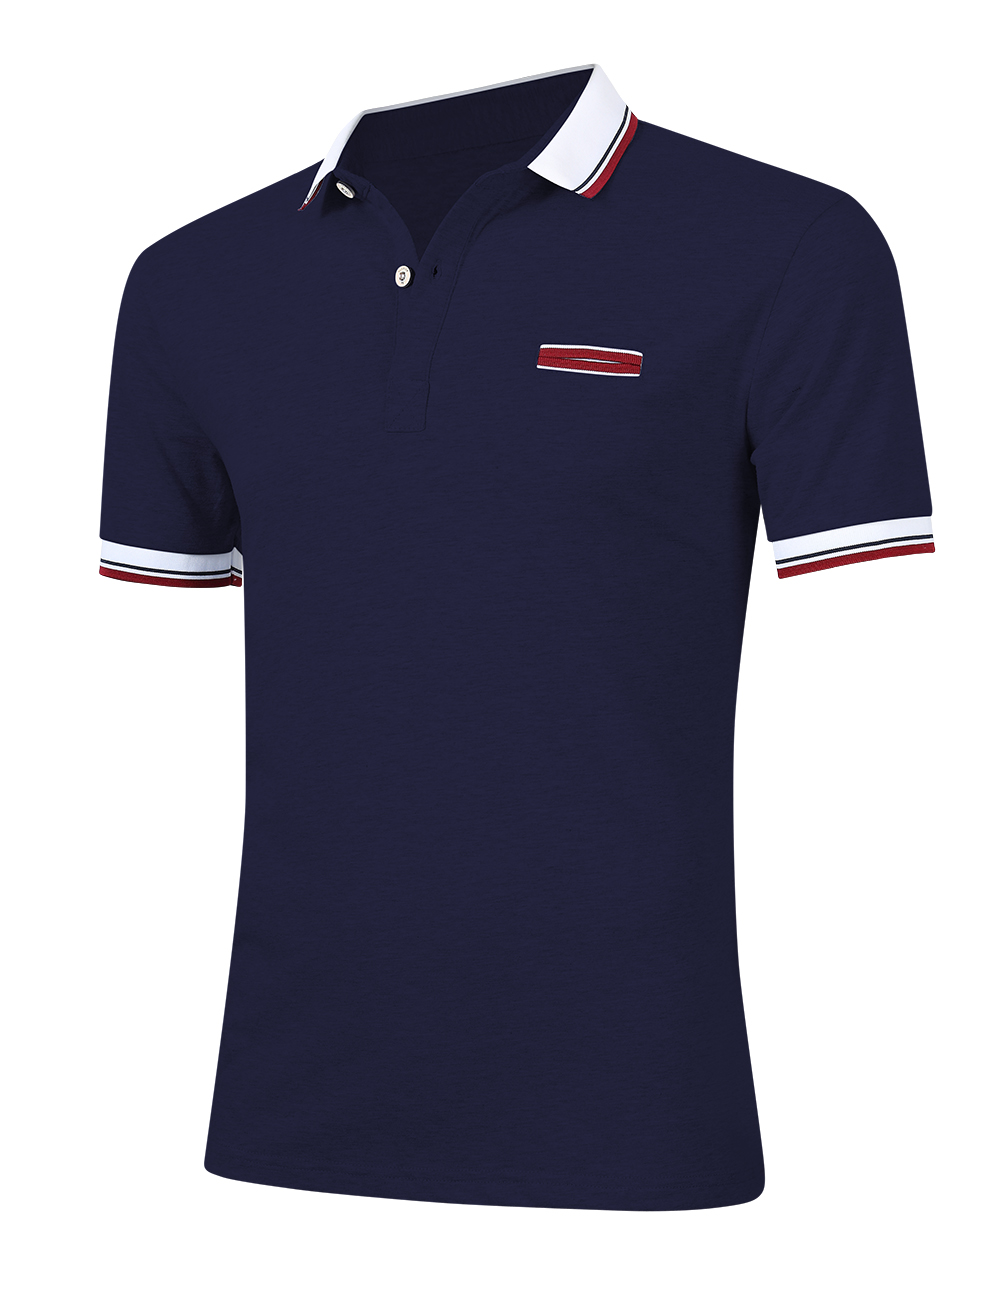 [US Direct] Young Horse Men Cotton Contrast Lapel Short Sleeve Slimming Polo Shirt Navy_5XL